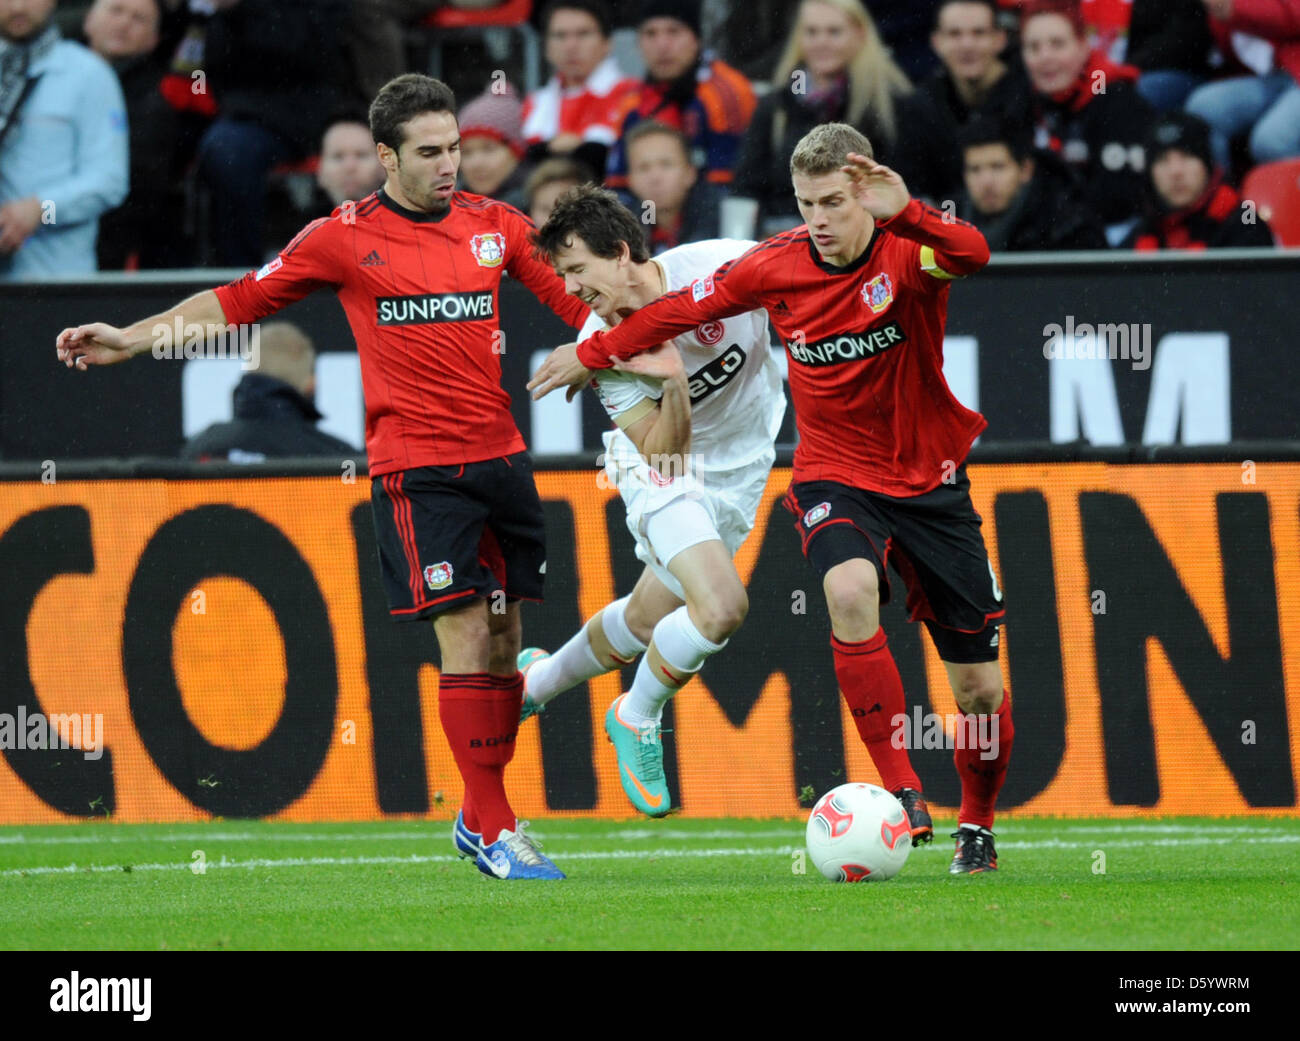 Leverkusen's Dani Carvajal (L) and Lars Bender (R) vies for the ball with Duesseldorf's Robbie Kruse during the German Bundesliga match between Bayer Leverkusen and Fortuna Duesseldorf at BayArena in Leverkusen, Germany, 04 November 2012. Photo: Daniel Naupold  (ATTENTION: EMBARGO CONDITIONS! The DFL permits the further  utilisation of up to 15 pictures only (no sequntial pictures  Stock Photo